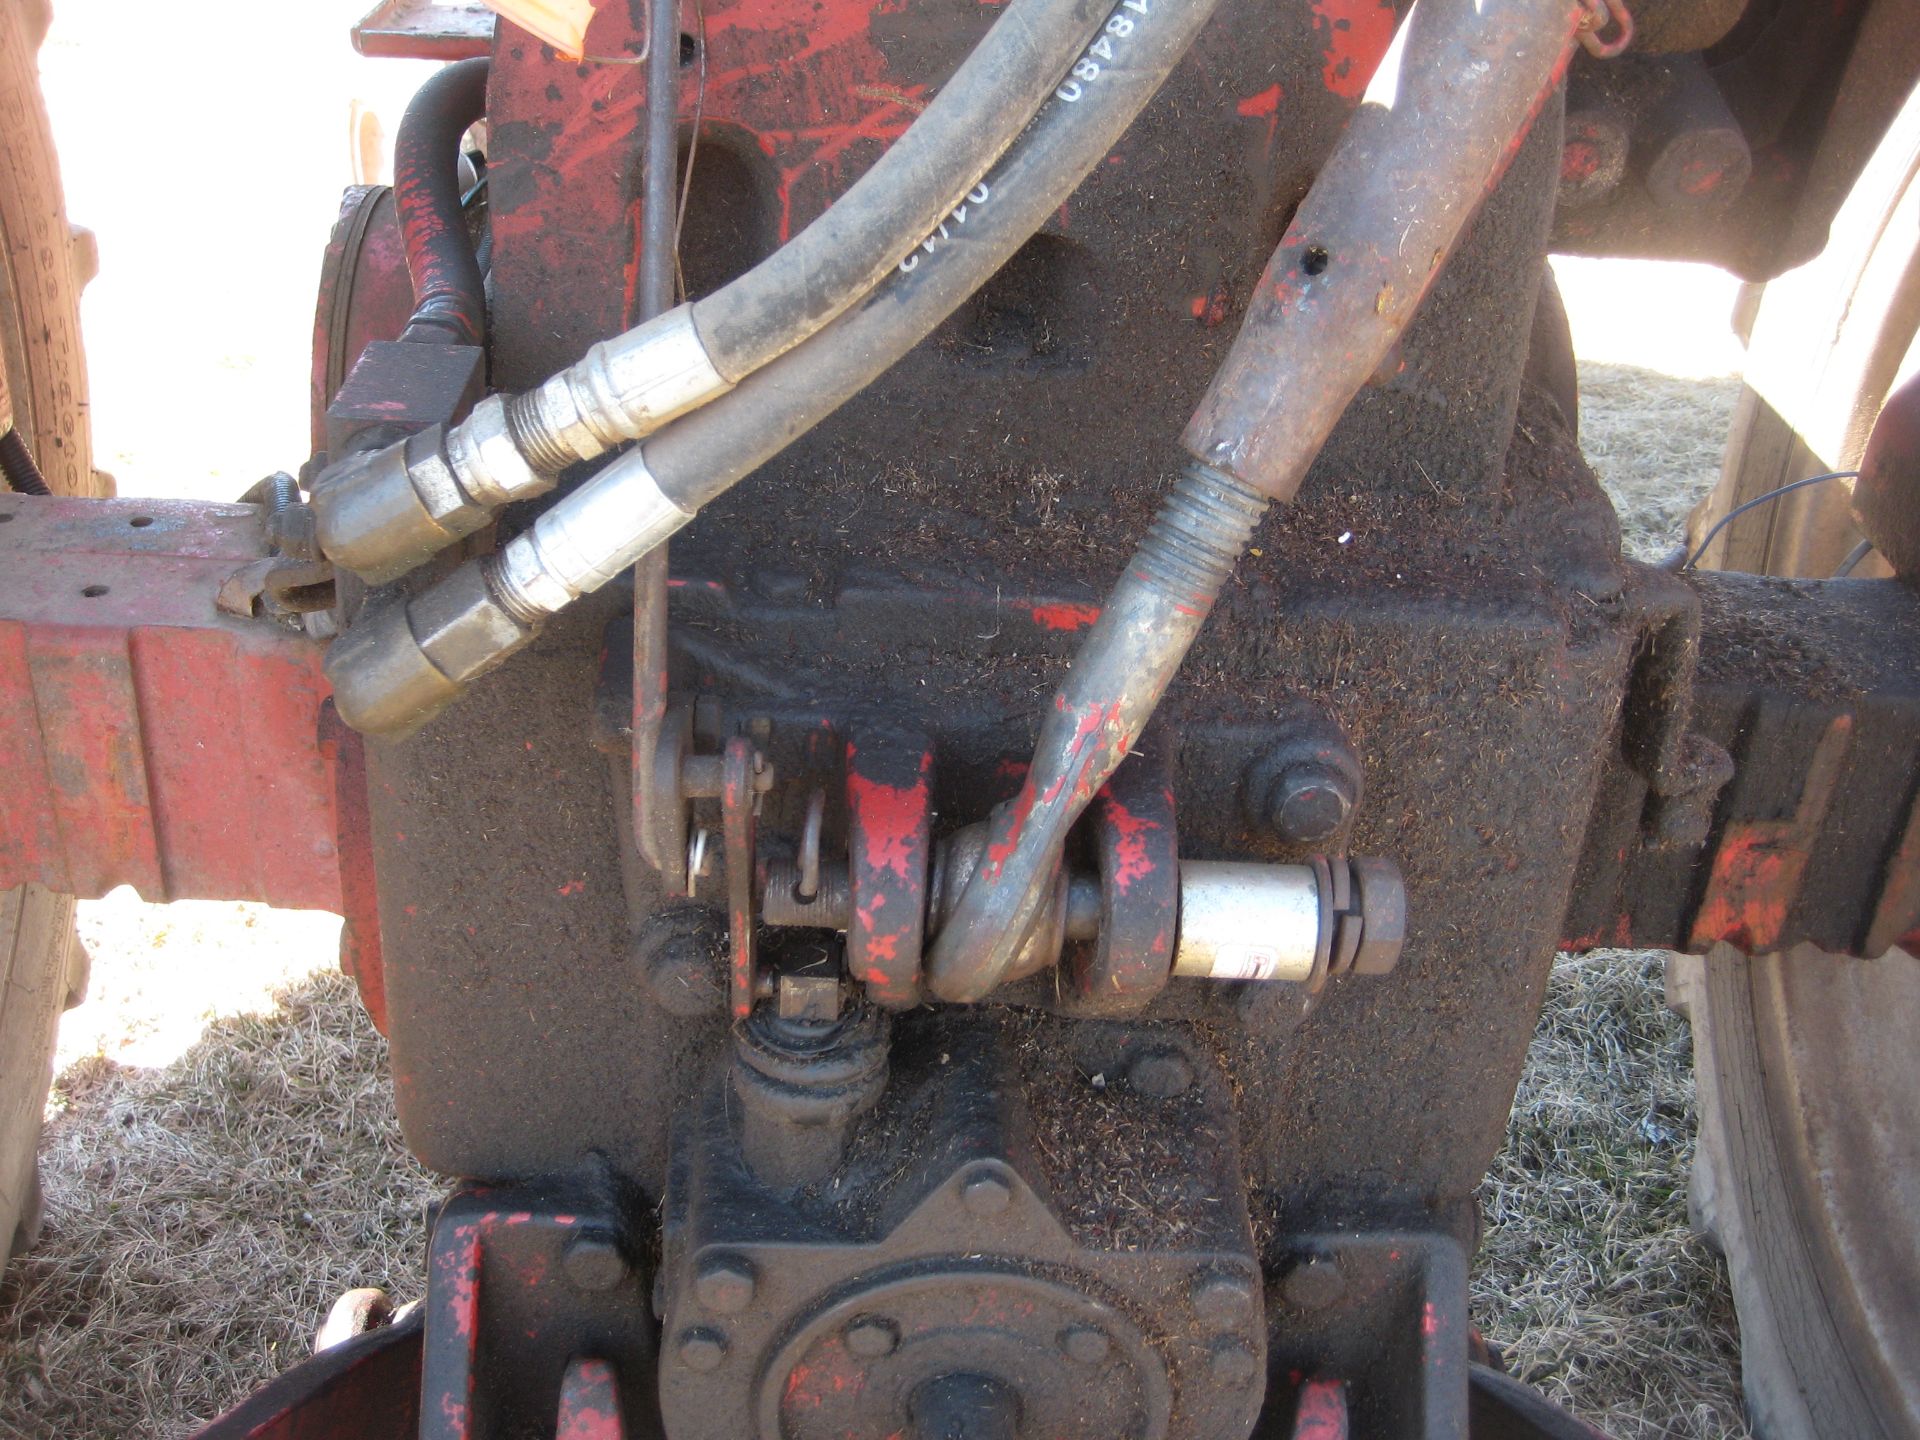 FARMALL 656, GAS, USED LITTLE LAST FEW YEARS, NO KNOWN PROBLEMS, 15.5x 38 Tires, SN-24032 - Image 5 of 18